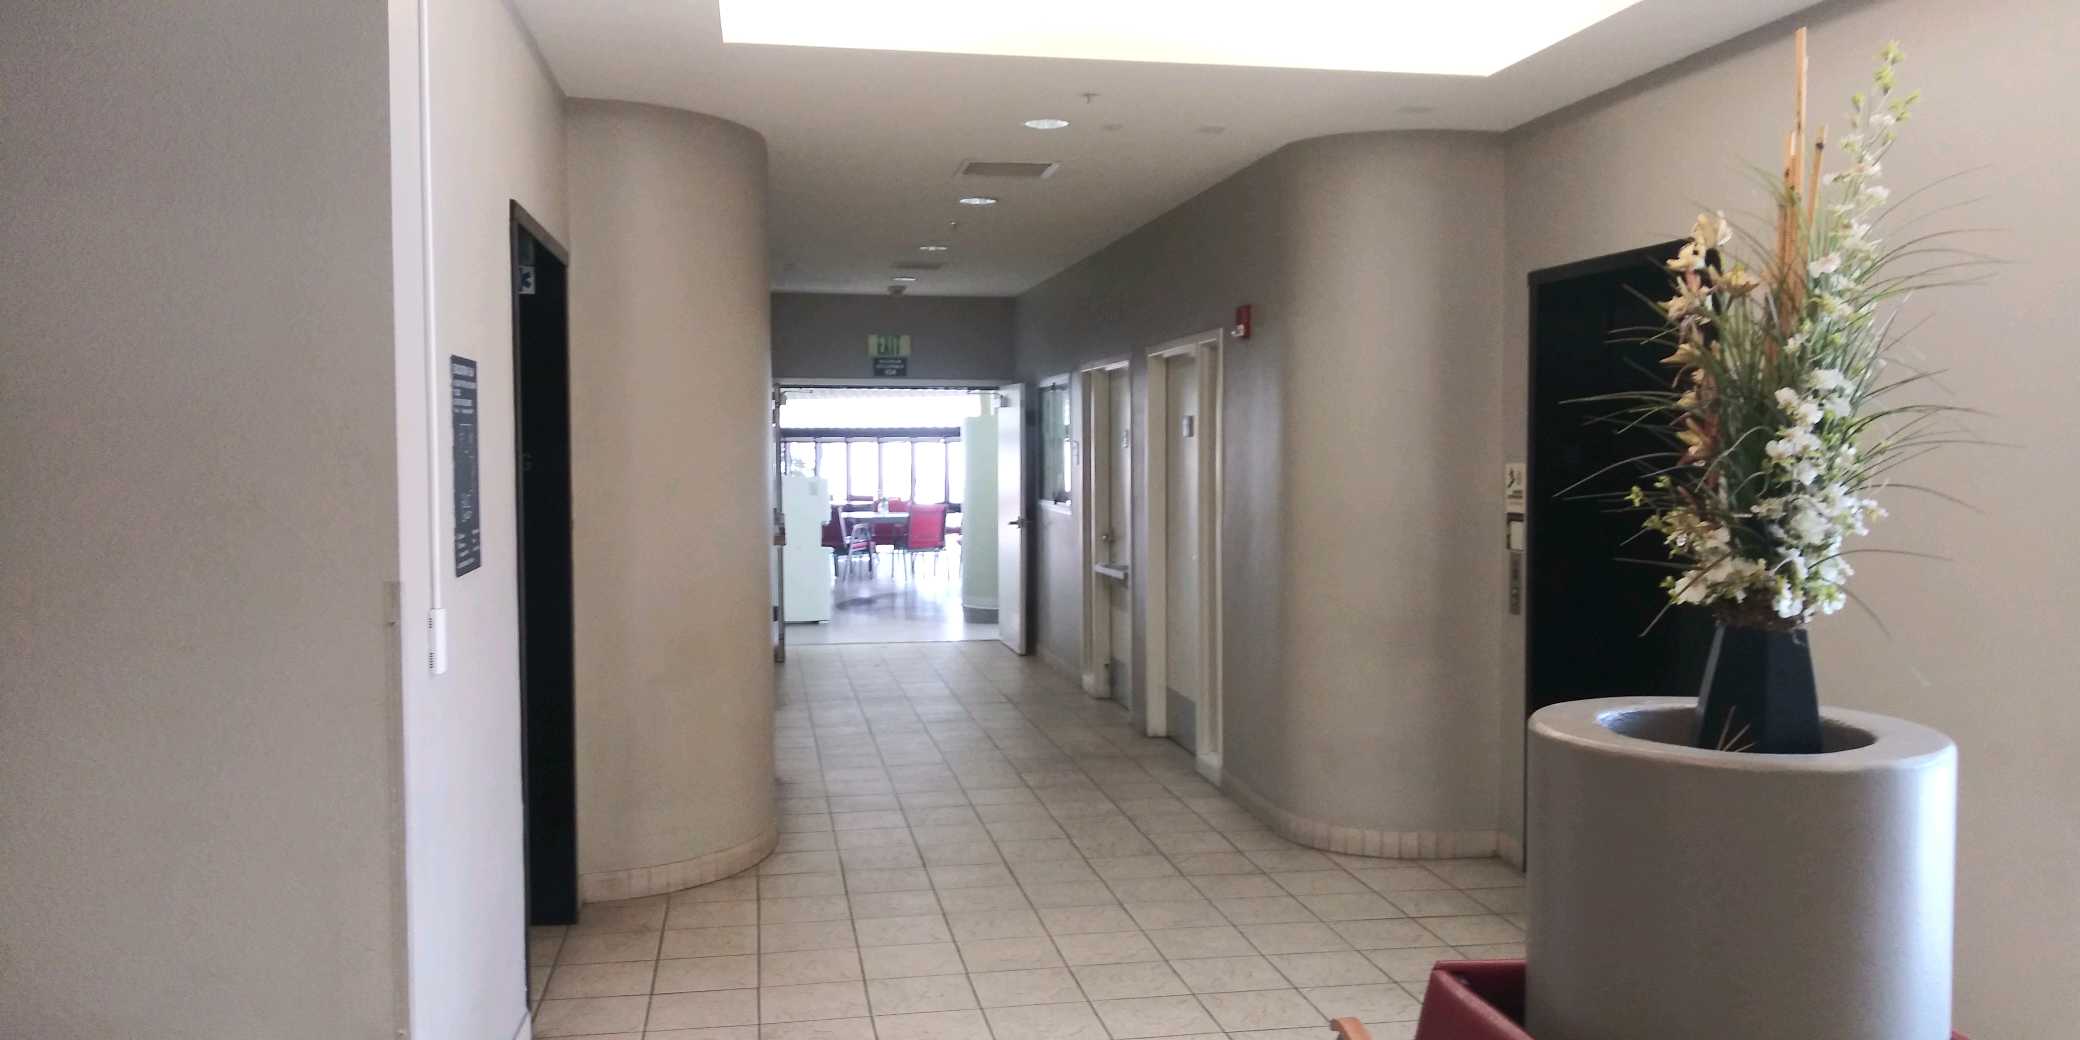 Hallway view of of lobby area. There are two elevators across from each other. There is a large lounging room pictured with multiple table sets in the distance.